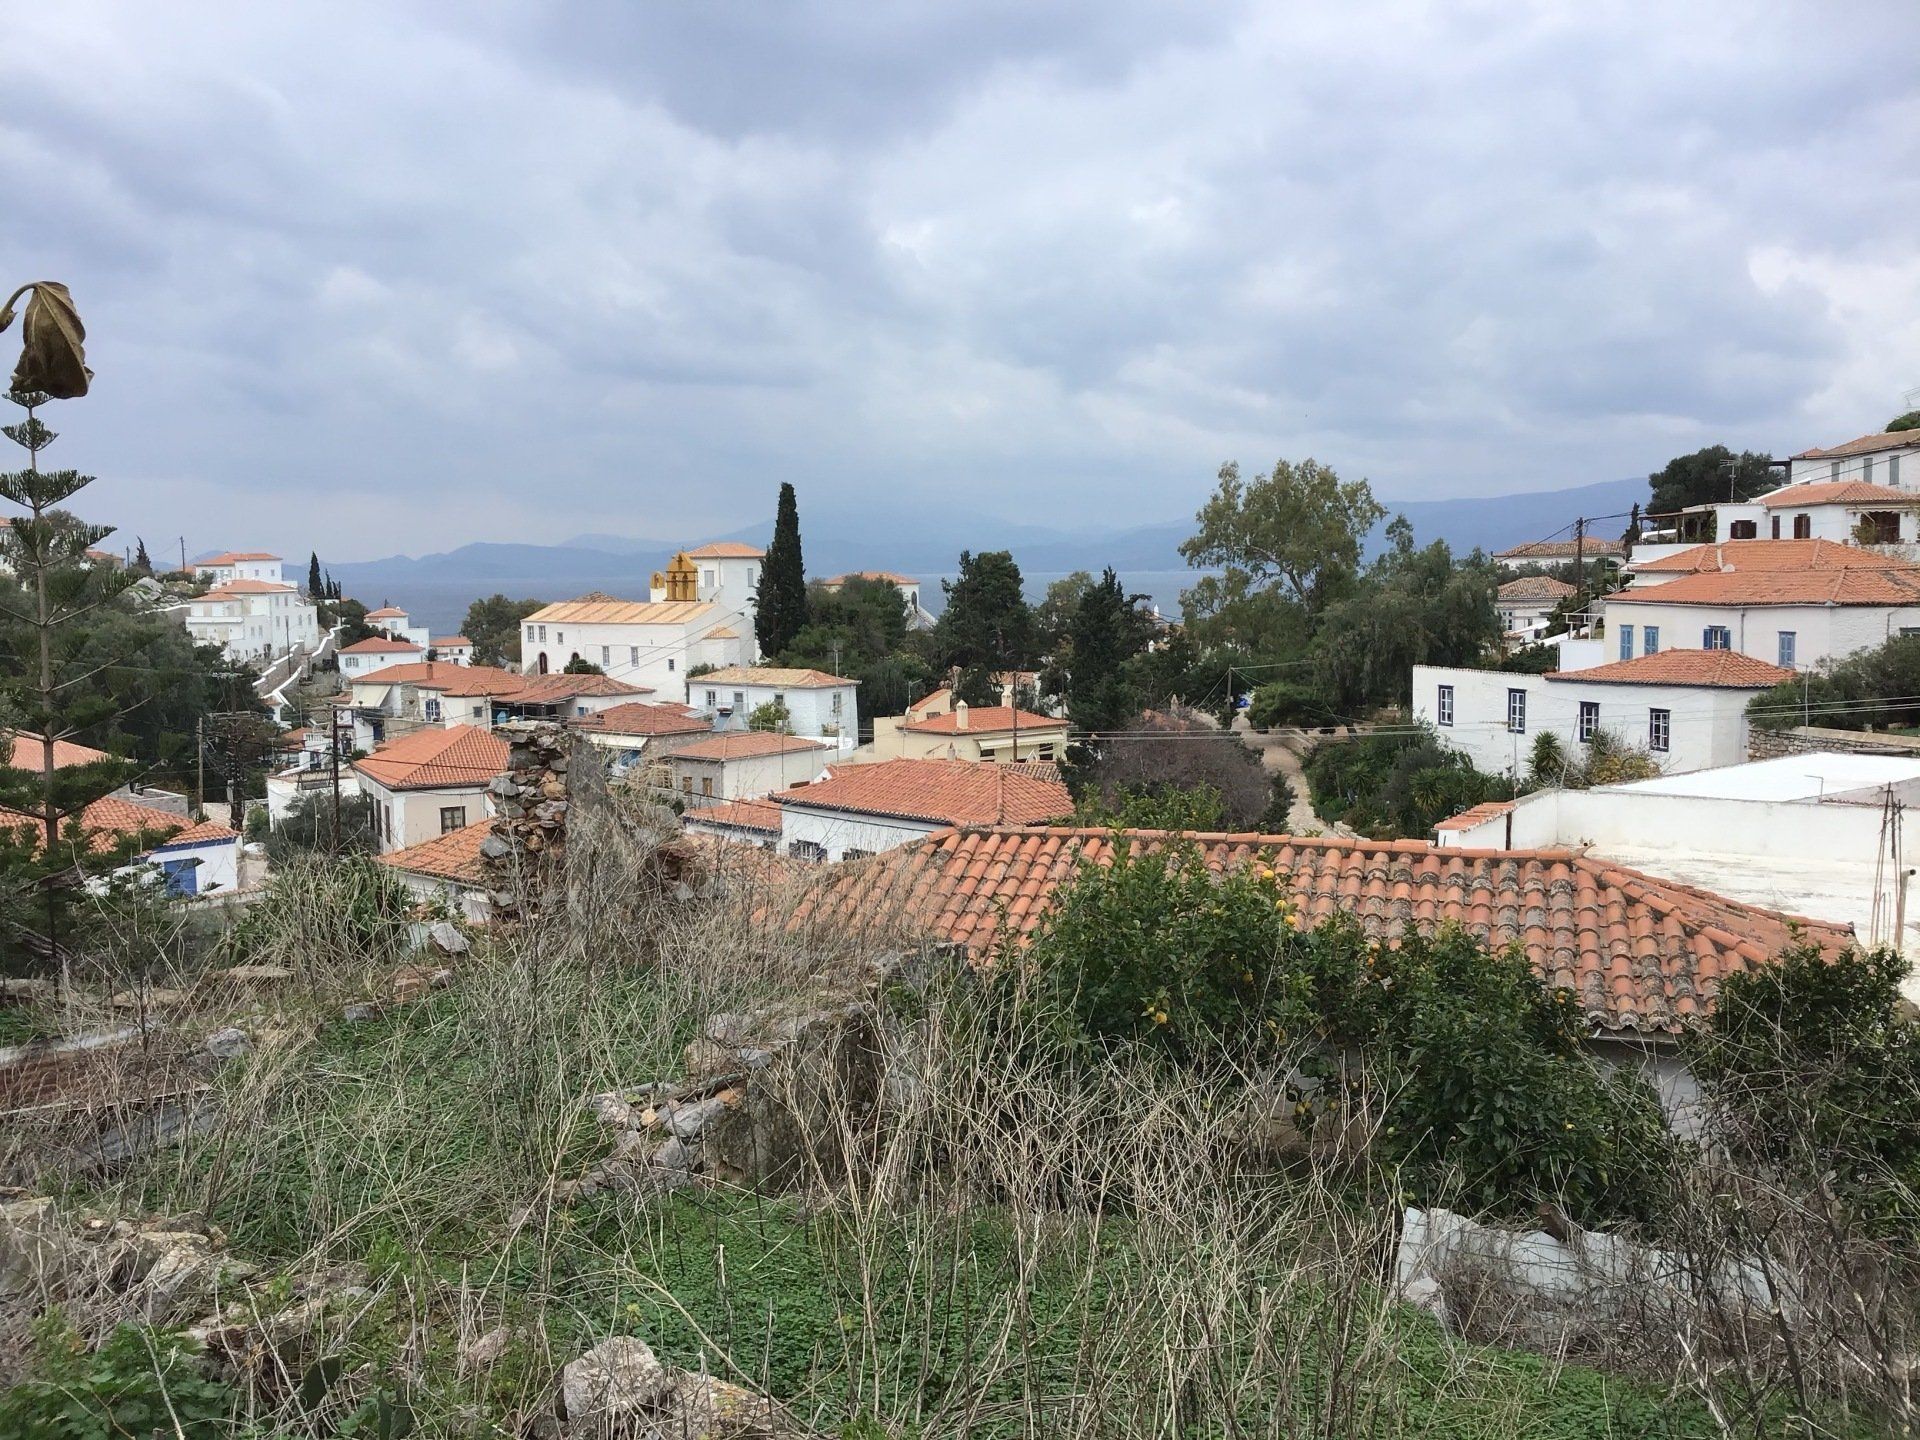 Land for sale with planning permit in Kamini on Hydra Island, Greece.